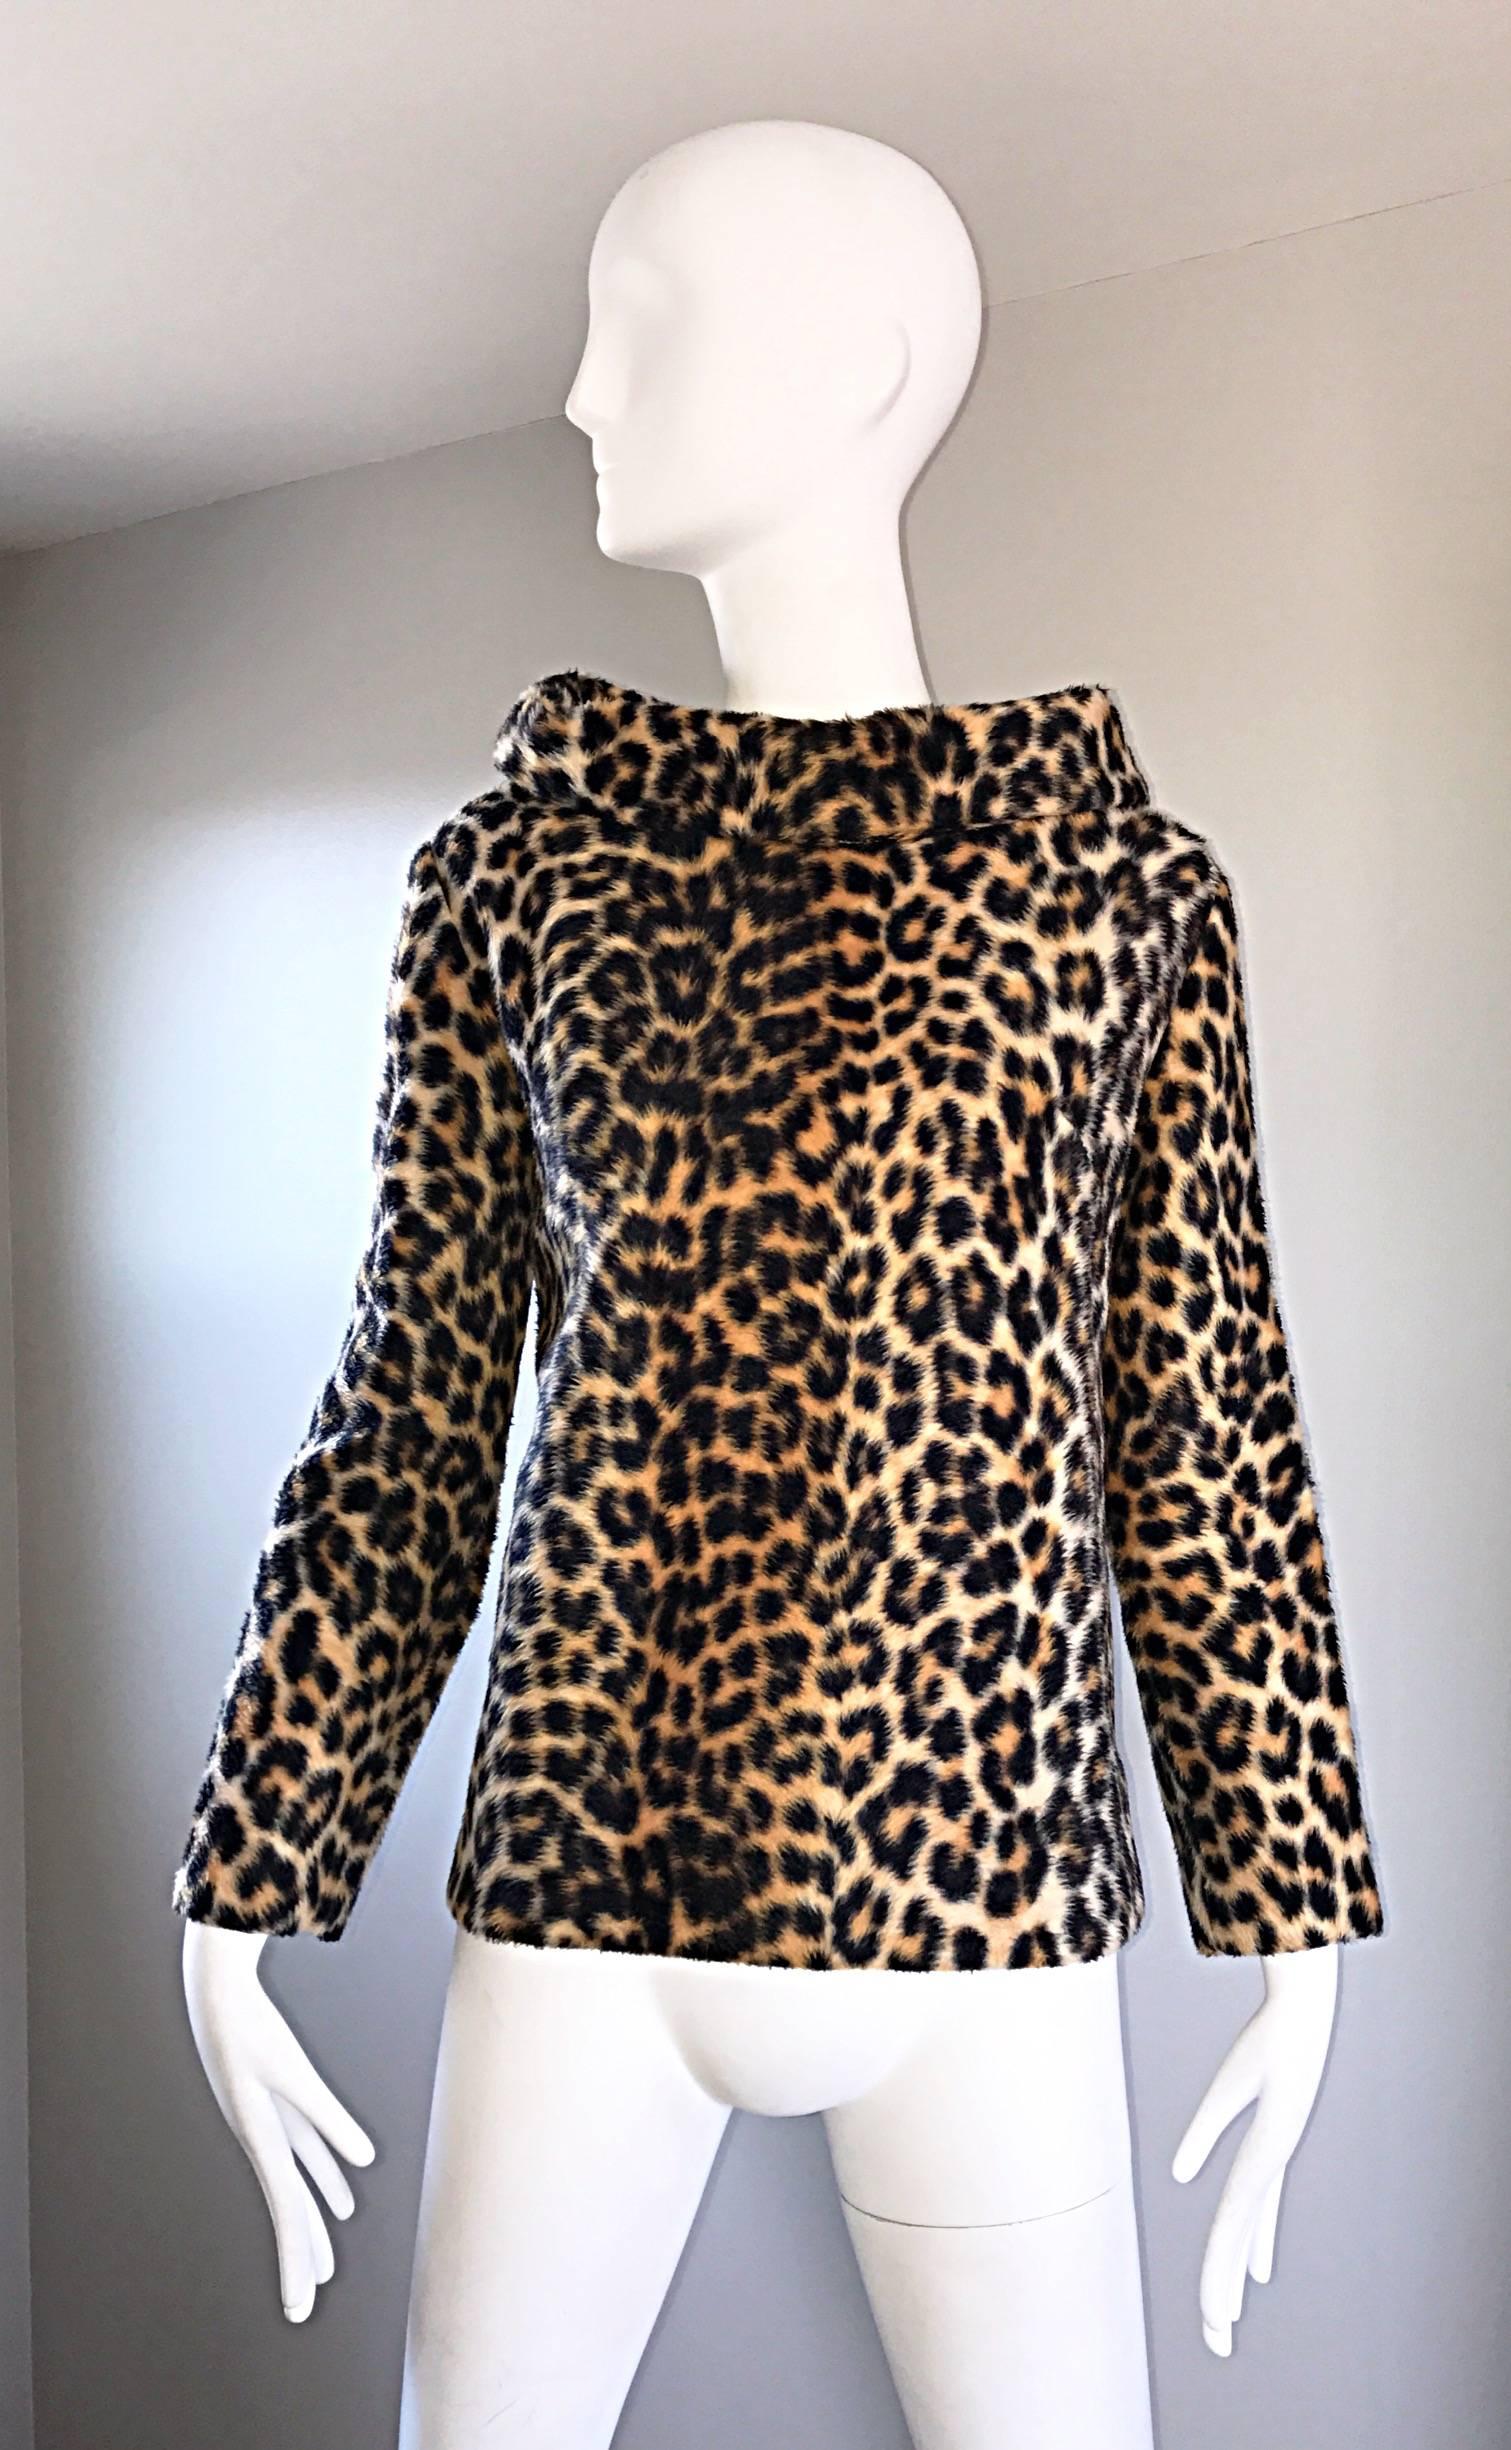 Chic vintage 1960s Jackie O style faux fur leopard / cheetah print long sleeve sweater / blouse! Super soft faux fur. Jackie-O style collar. Trapeze fit, with a fitted bust and slightly flared body. Full metal zipper up the back with hook-and-eye